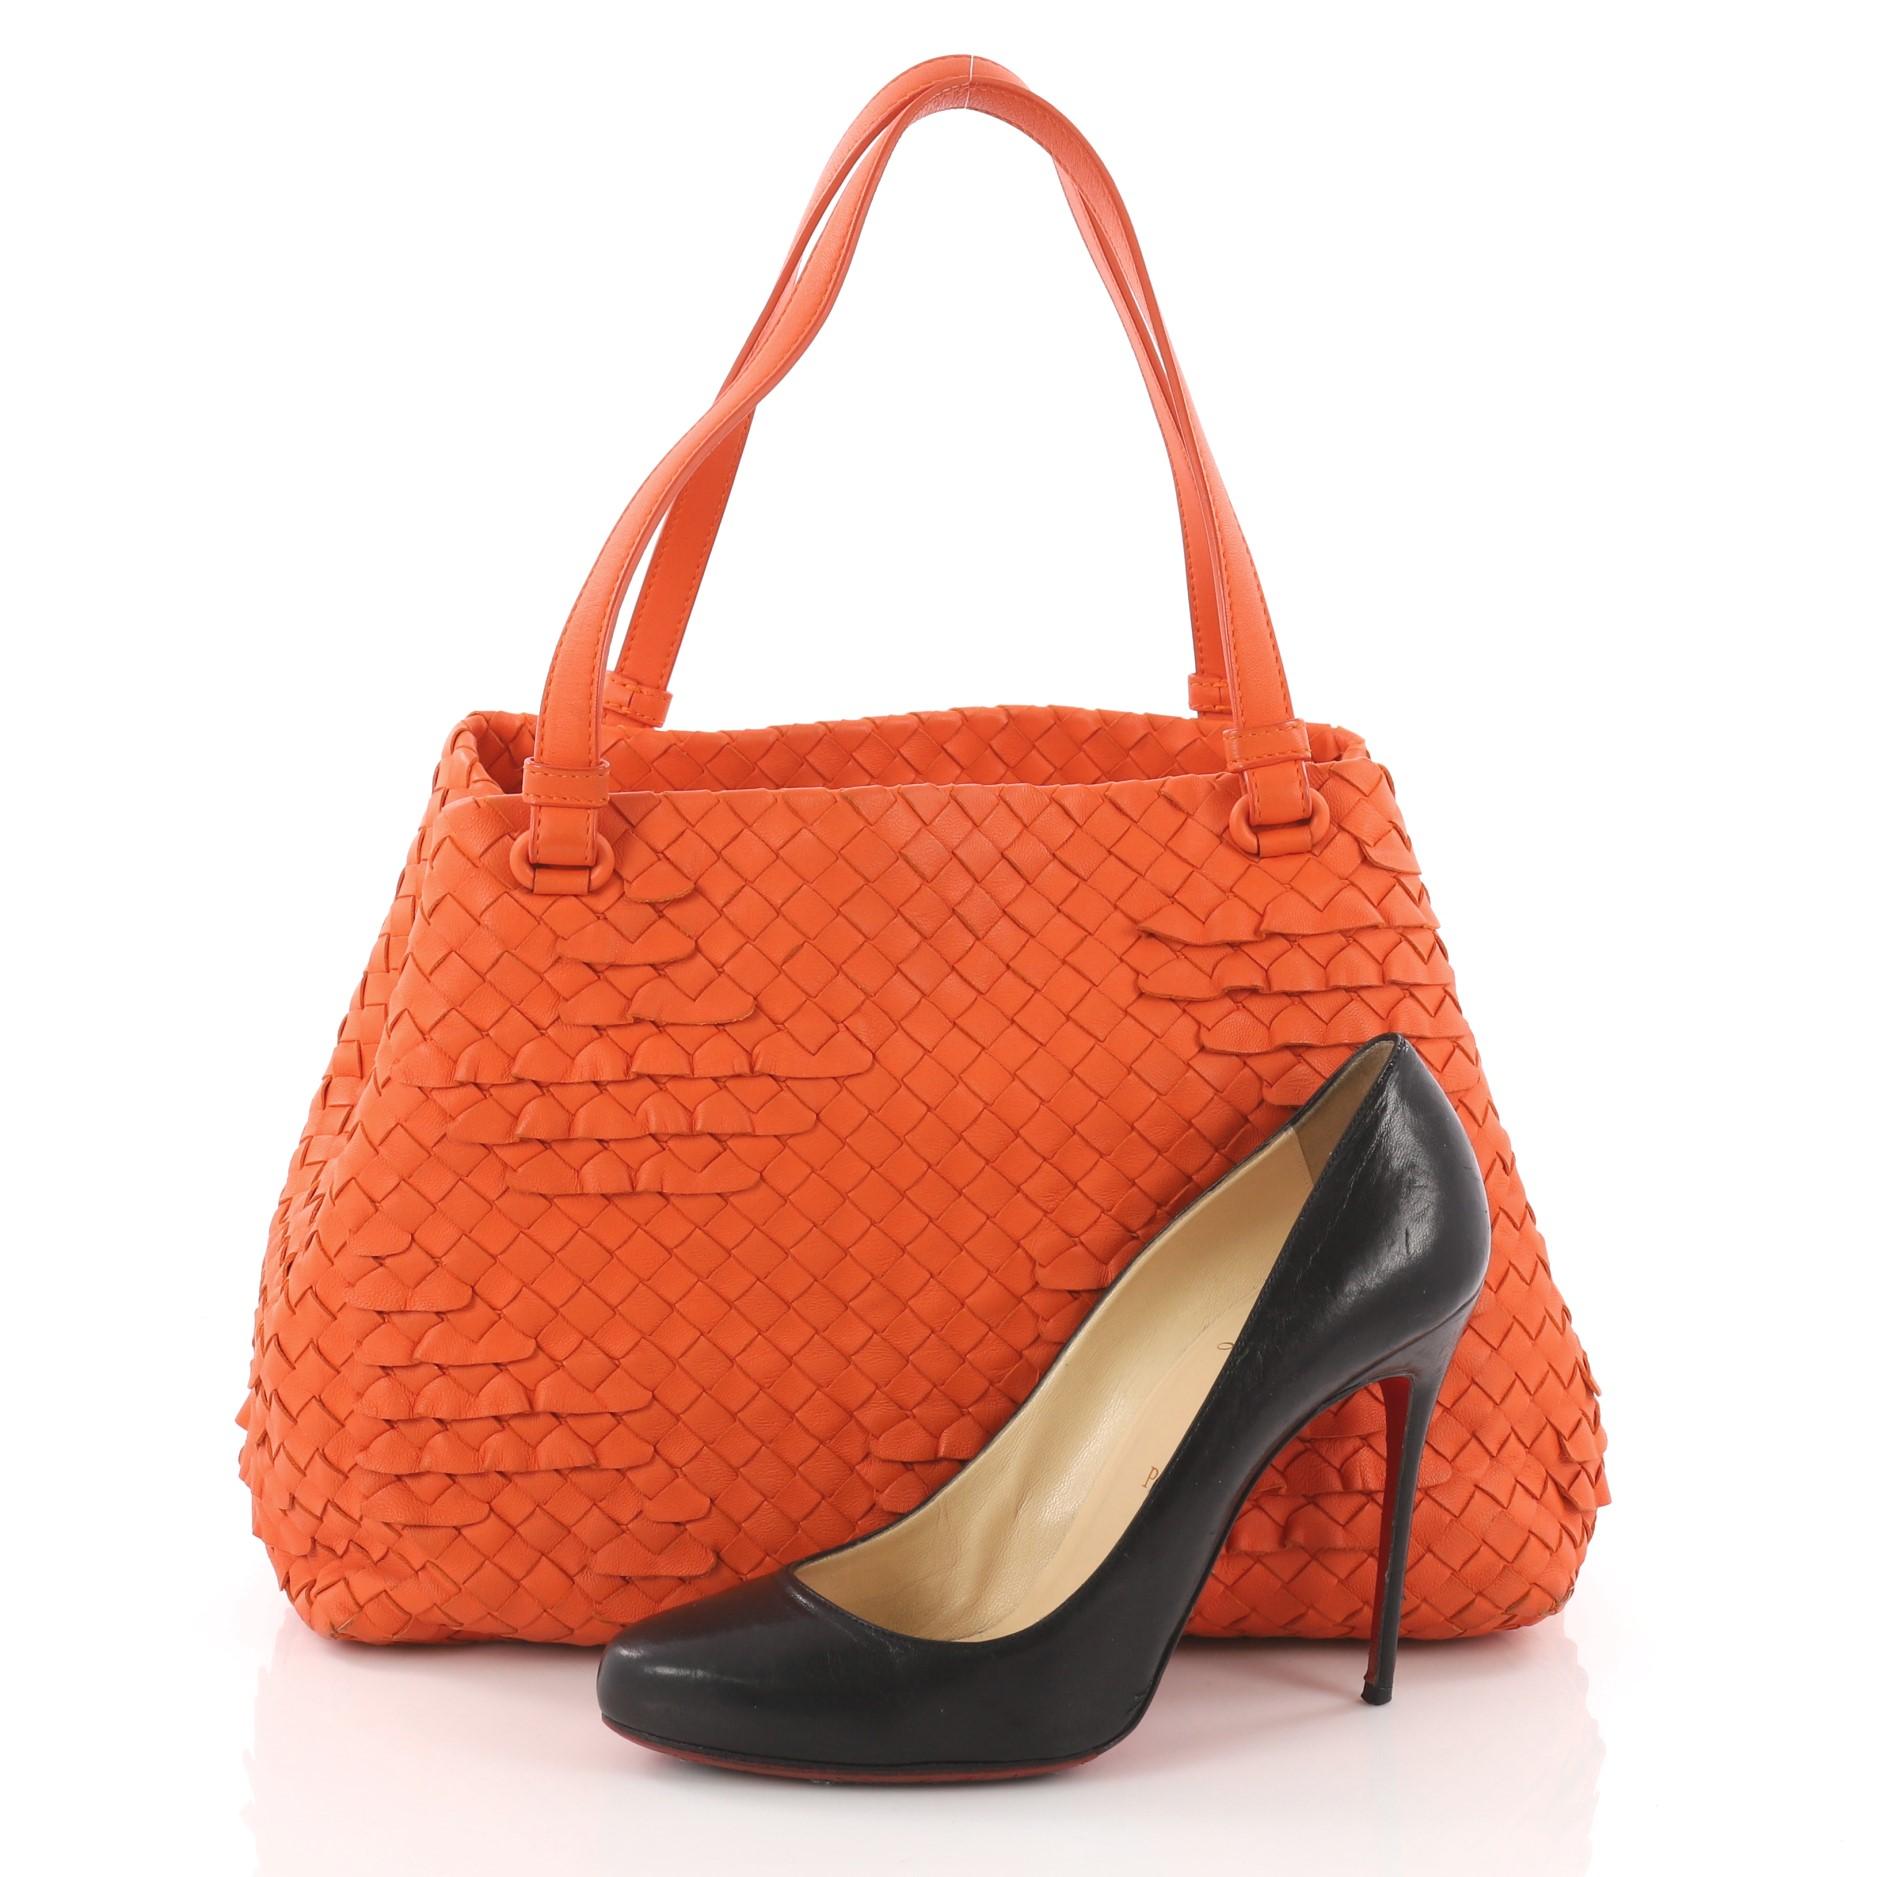 This authentic Bottega Veneta Open Tote Miniode Intrecciato Nappa Small is a statement piece you can surely take from day to night. Beautifully crafted in orange nappa leather in Bottega Veneta's signature intrecciato woven method with frilly